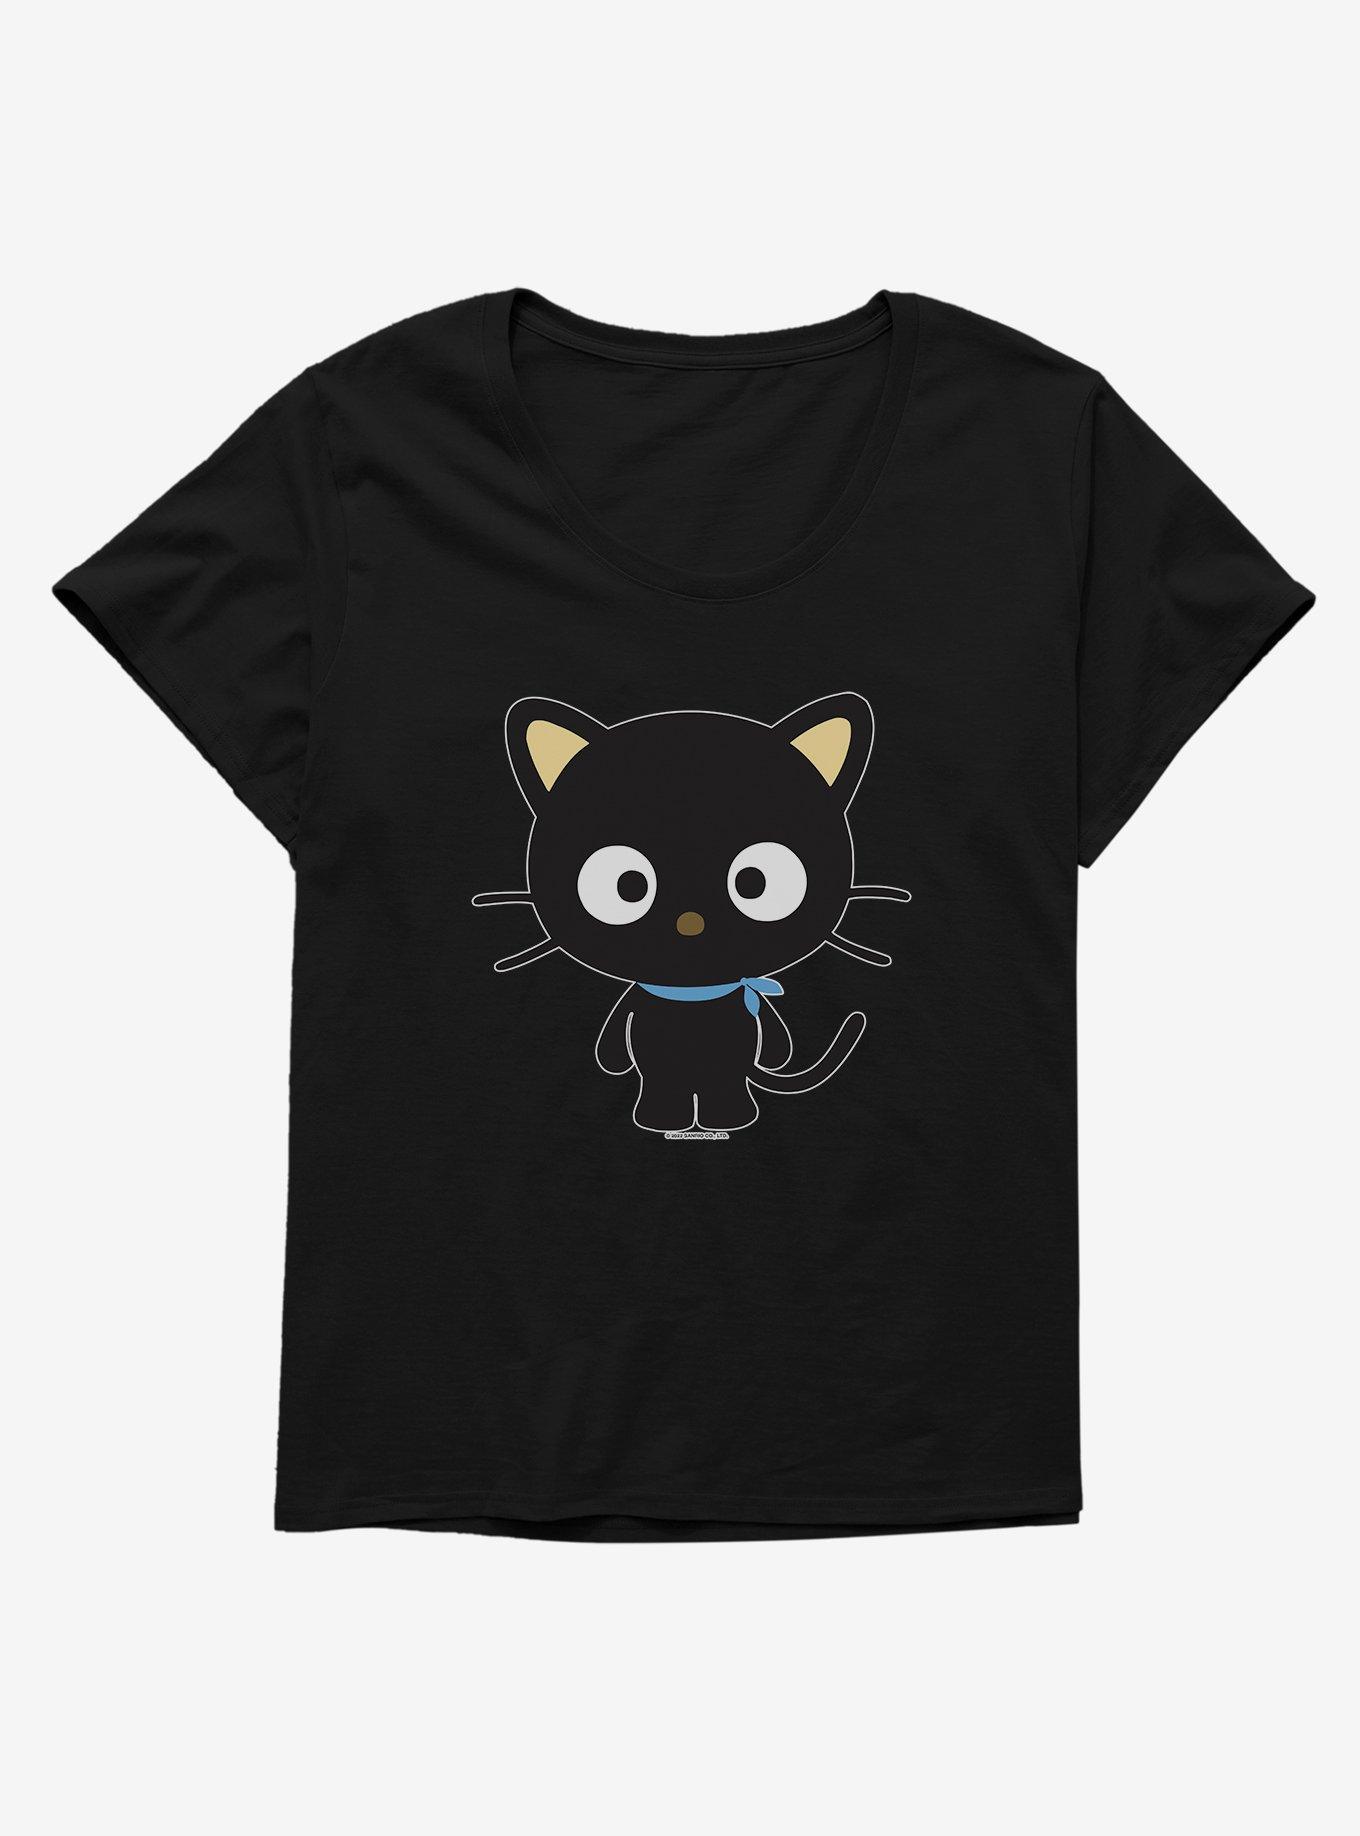 Chococat At Attention Womens T-Shirt Plus Size, , hi-res